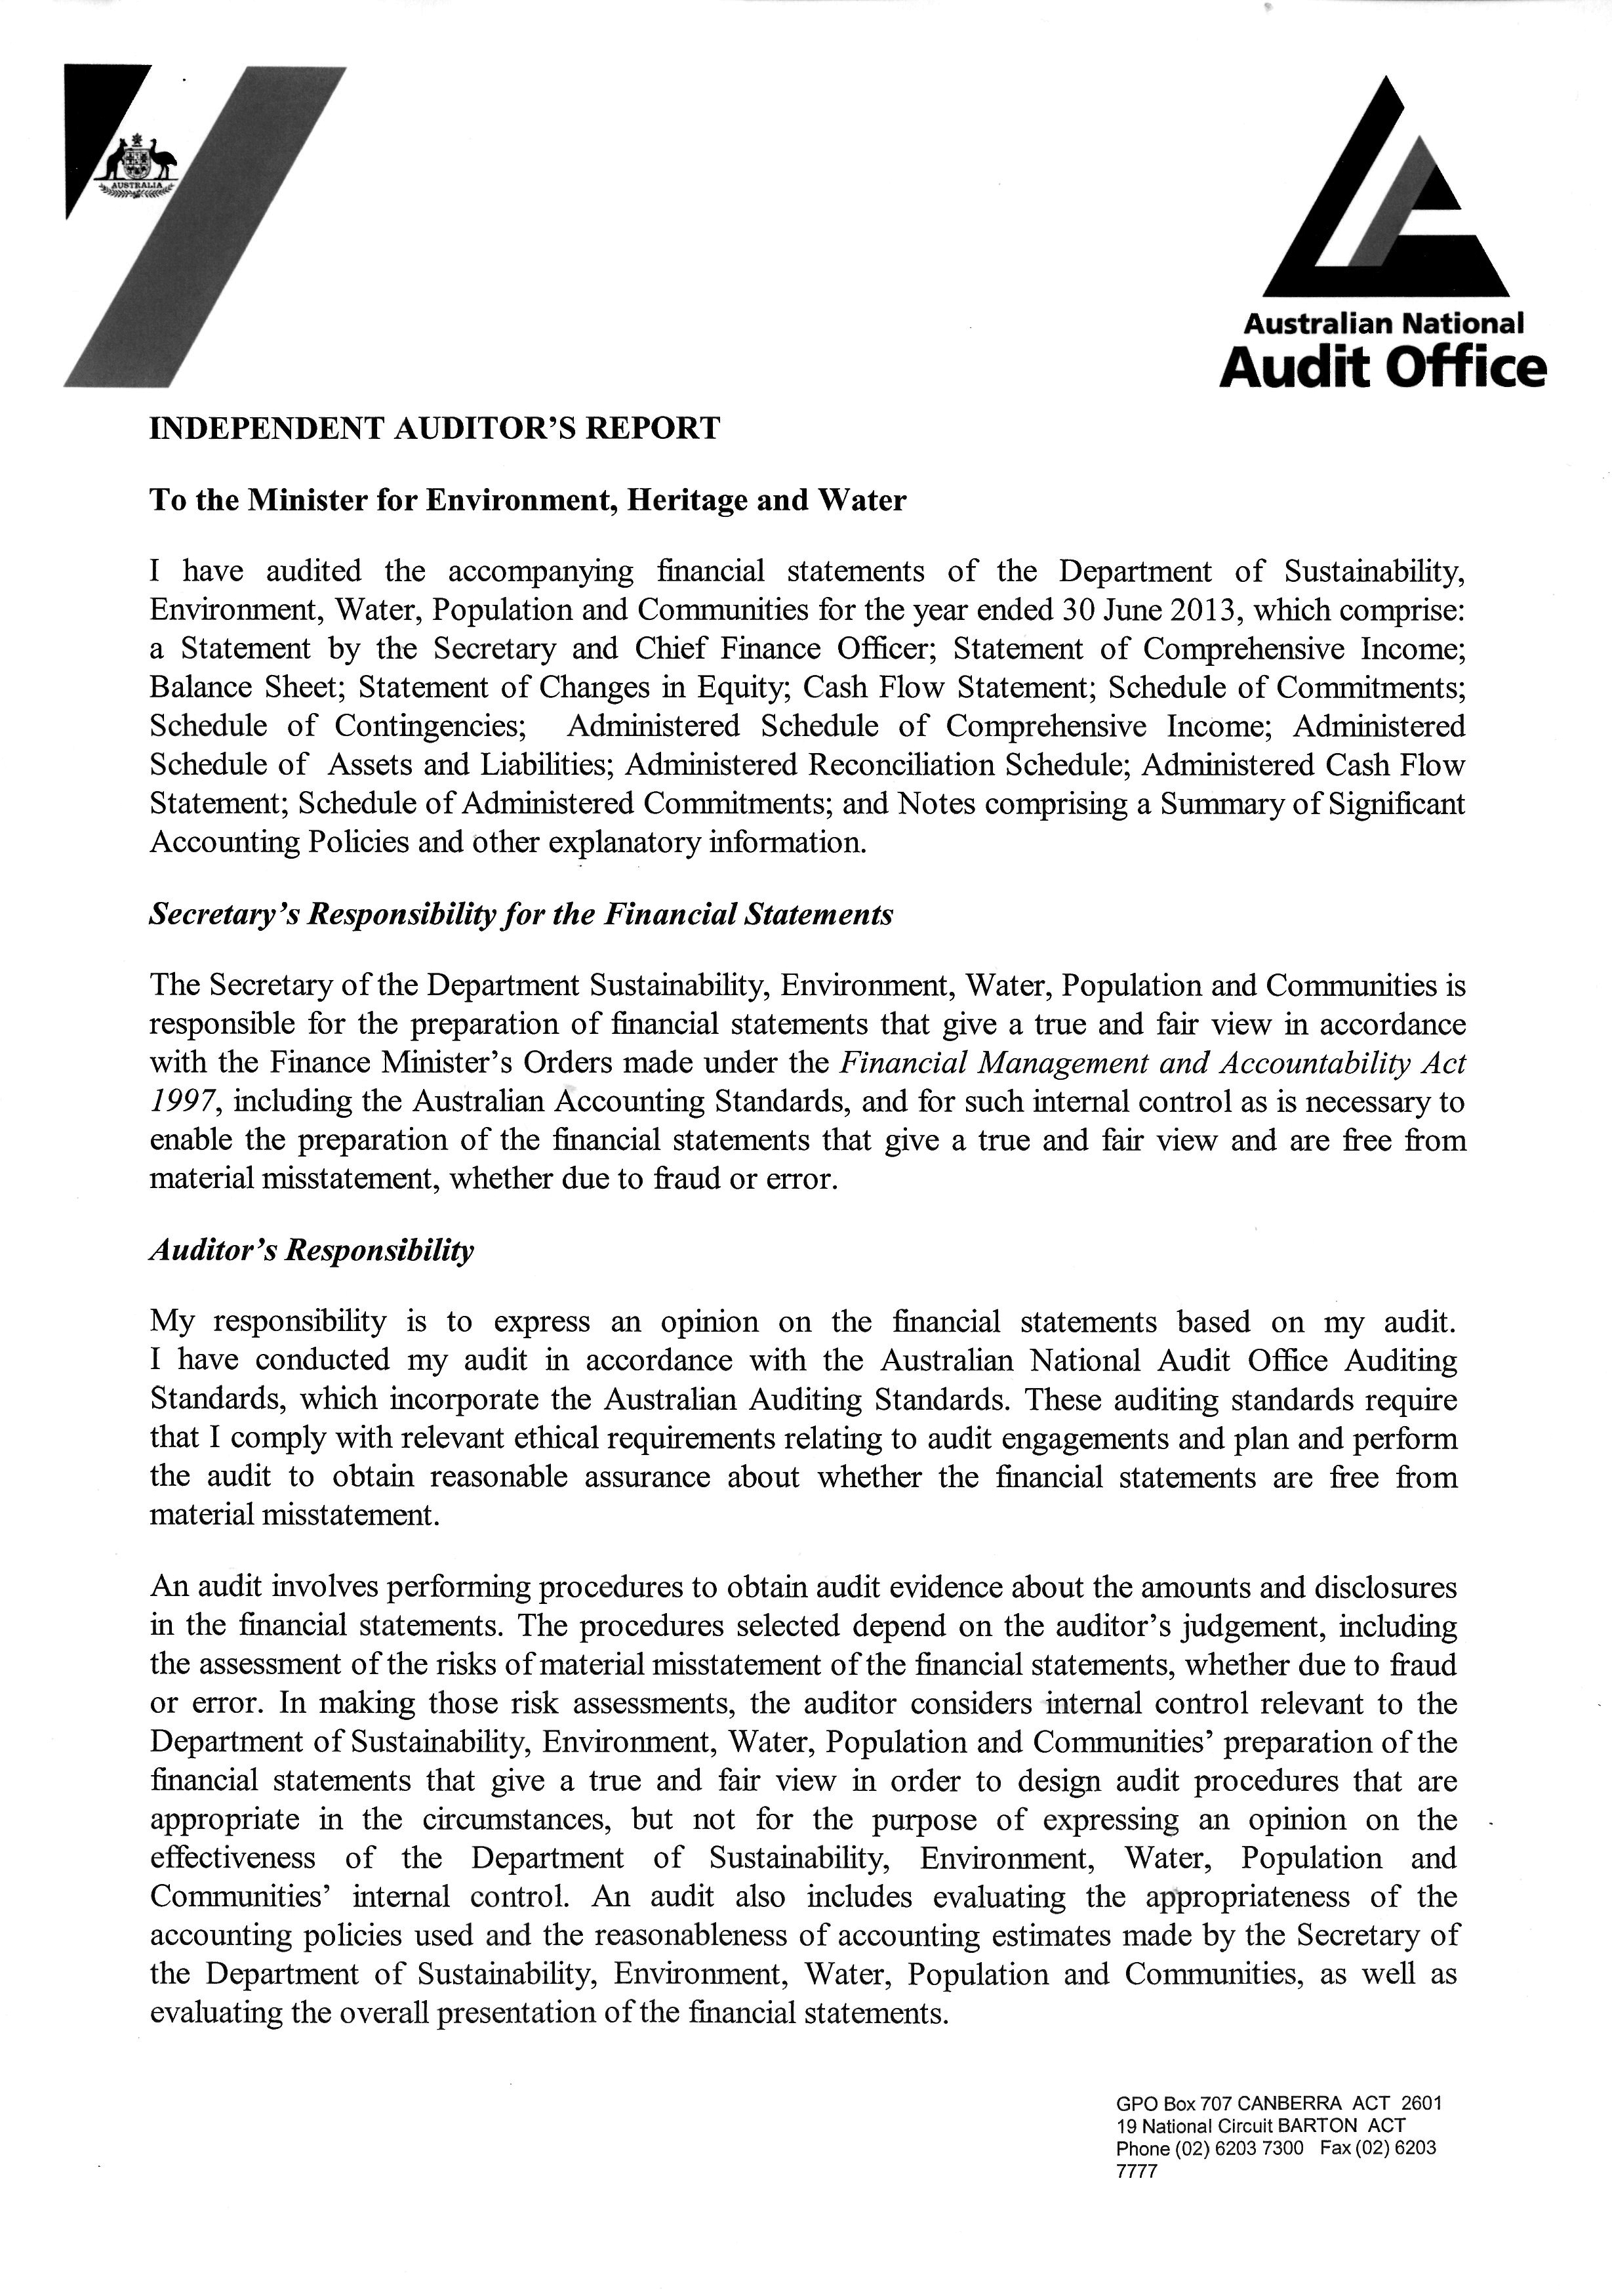 independent auditor’s report for the financial statements for the department of sustainability, environment, water, population and communities. covering letter to the minister for the environment, heritage and water. signed john jones, executive director, australian national audit office, delegate of the auditor-general, canberra, 31 august 2013 (page 1 of 2).